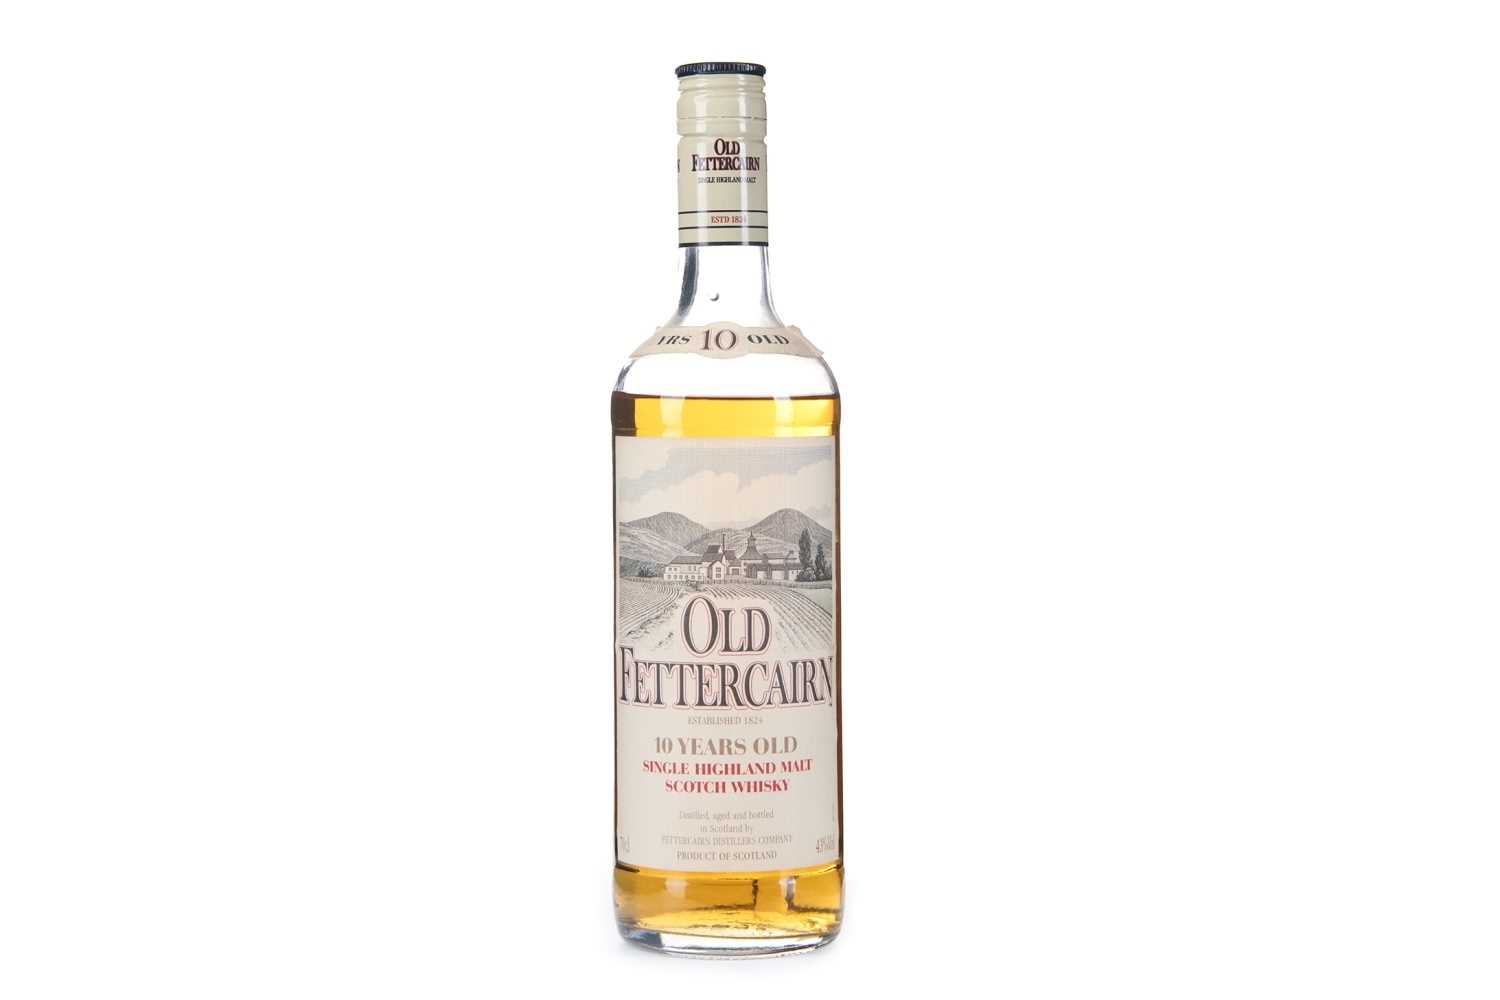 Lot 273 - OLD FETTERCAIRN 10 YEARS OLD - LOW FILL